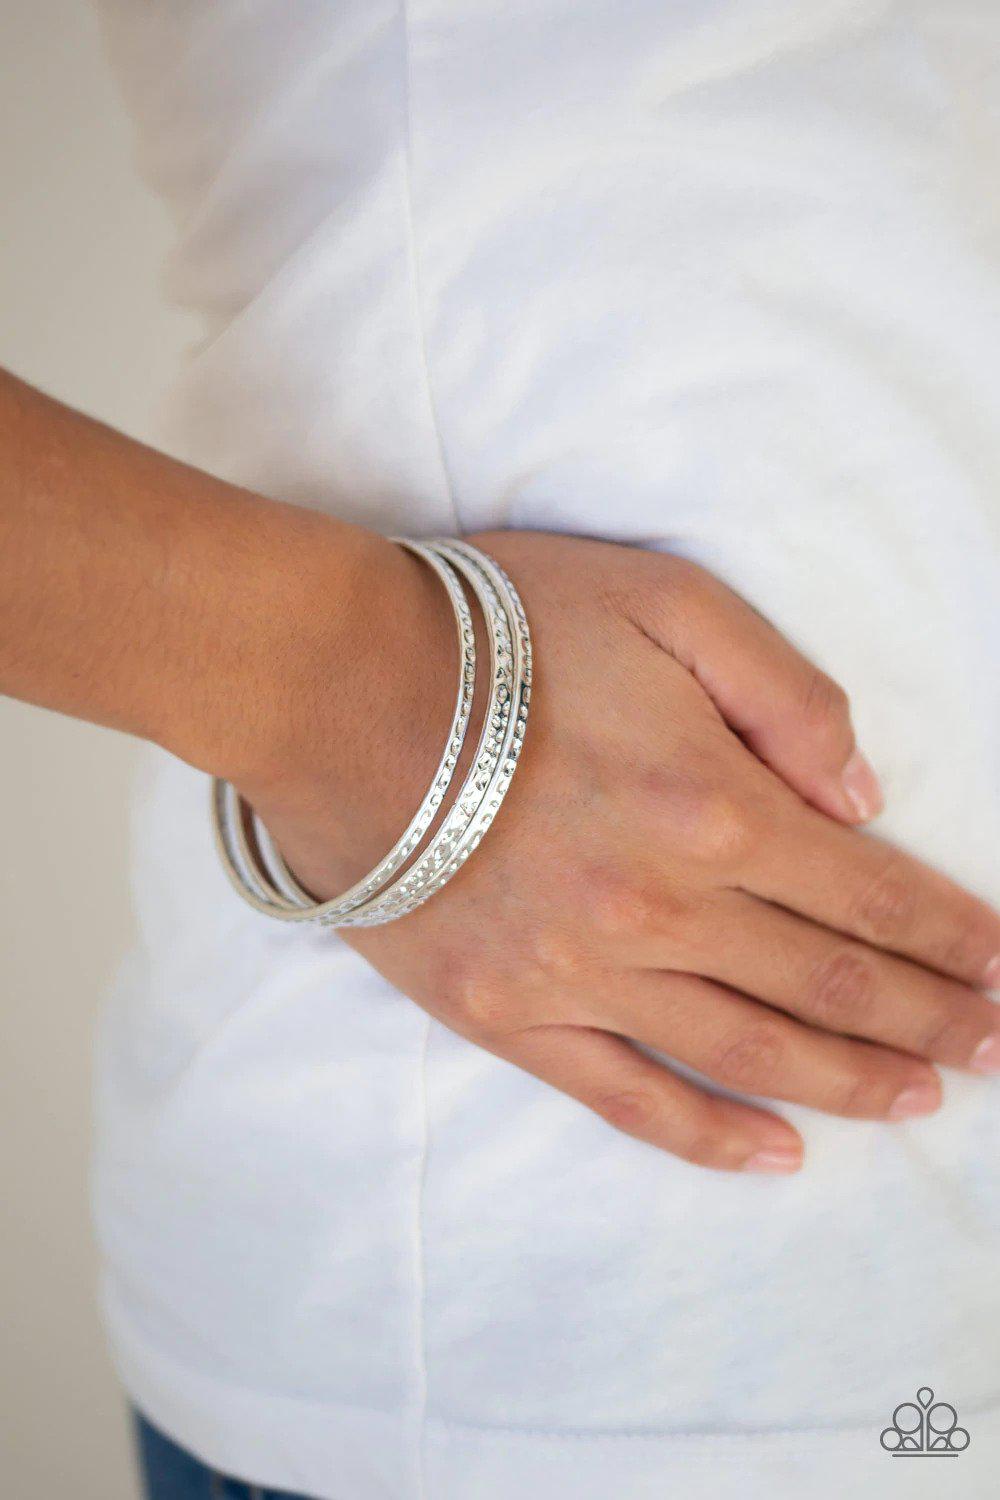 Casually Couture Silver Bangle Bracelet - Paparazzi Accessories- lightbox - CarasShop.com - $5 Jewelry by Cara Jewels